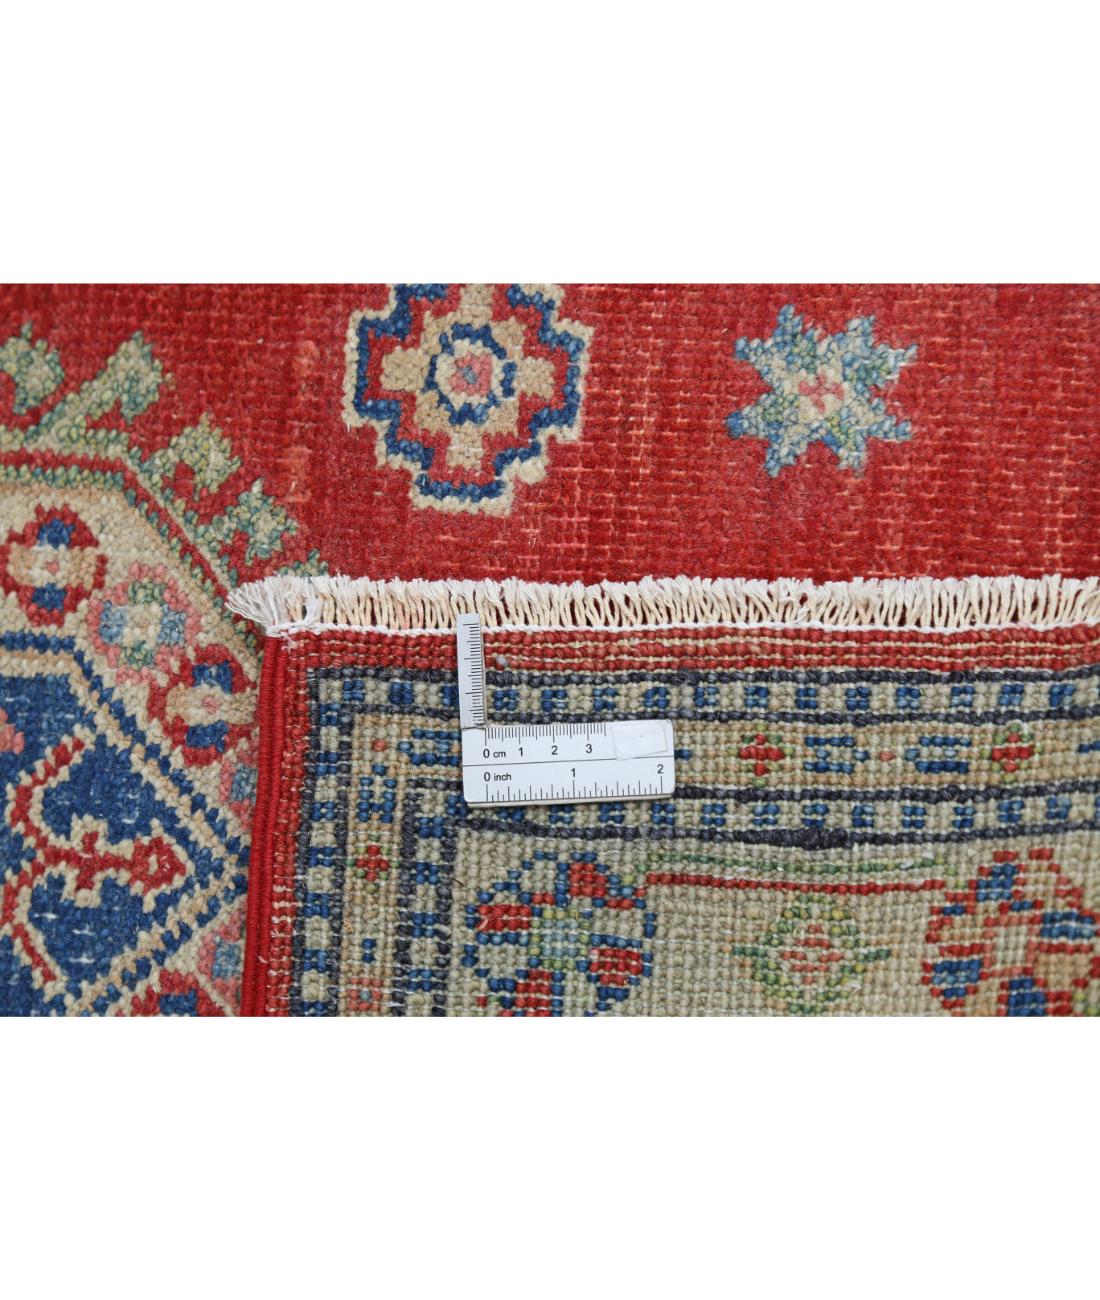 Hand Knotted Tribal Kazak Wool Rug - 2'6'' x 3'11'' 2' 6" X 3' 11" (76 X 119) / Red / Ivory